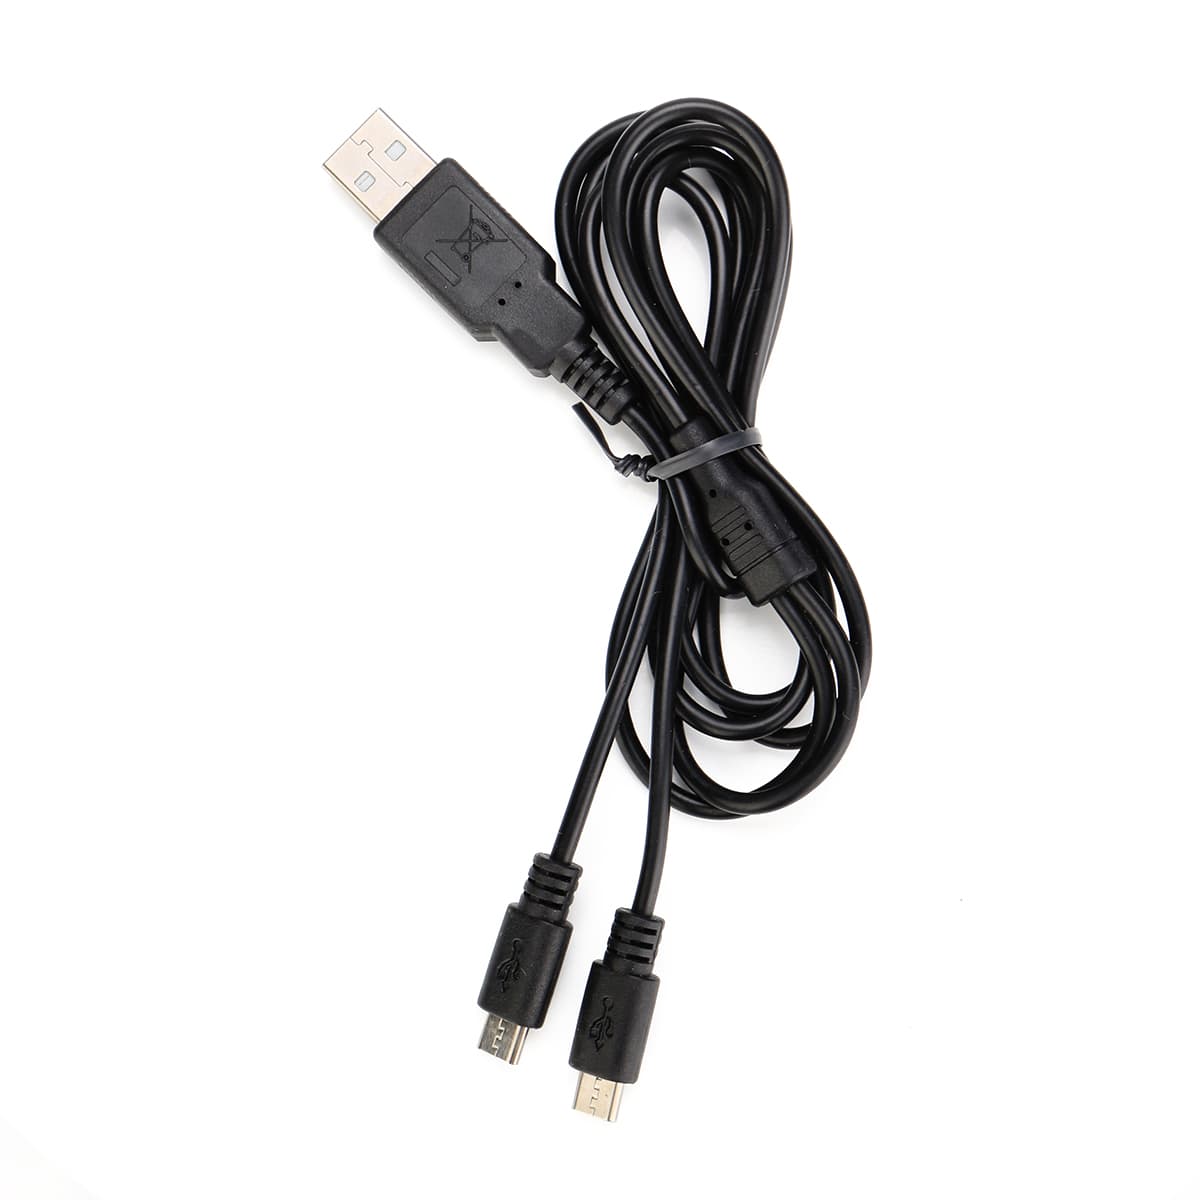 Original 2-in-1 USB Charging Cable for Retevis RT45 Radio